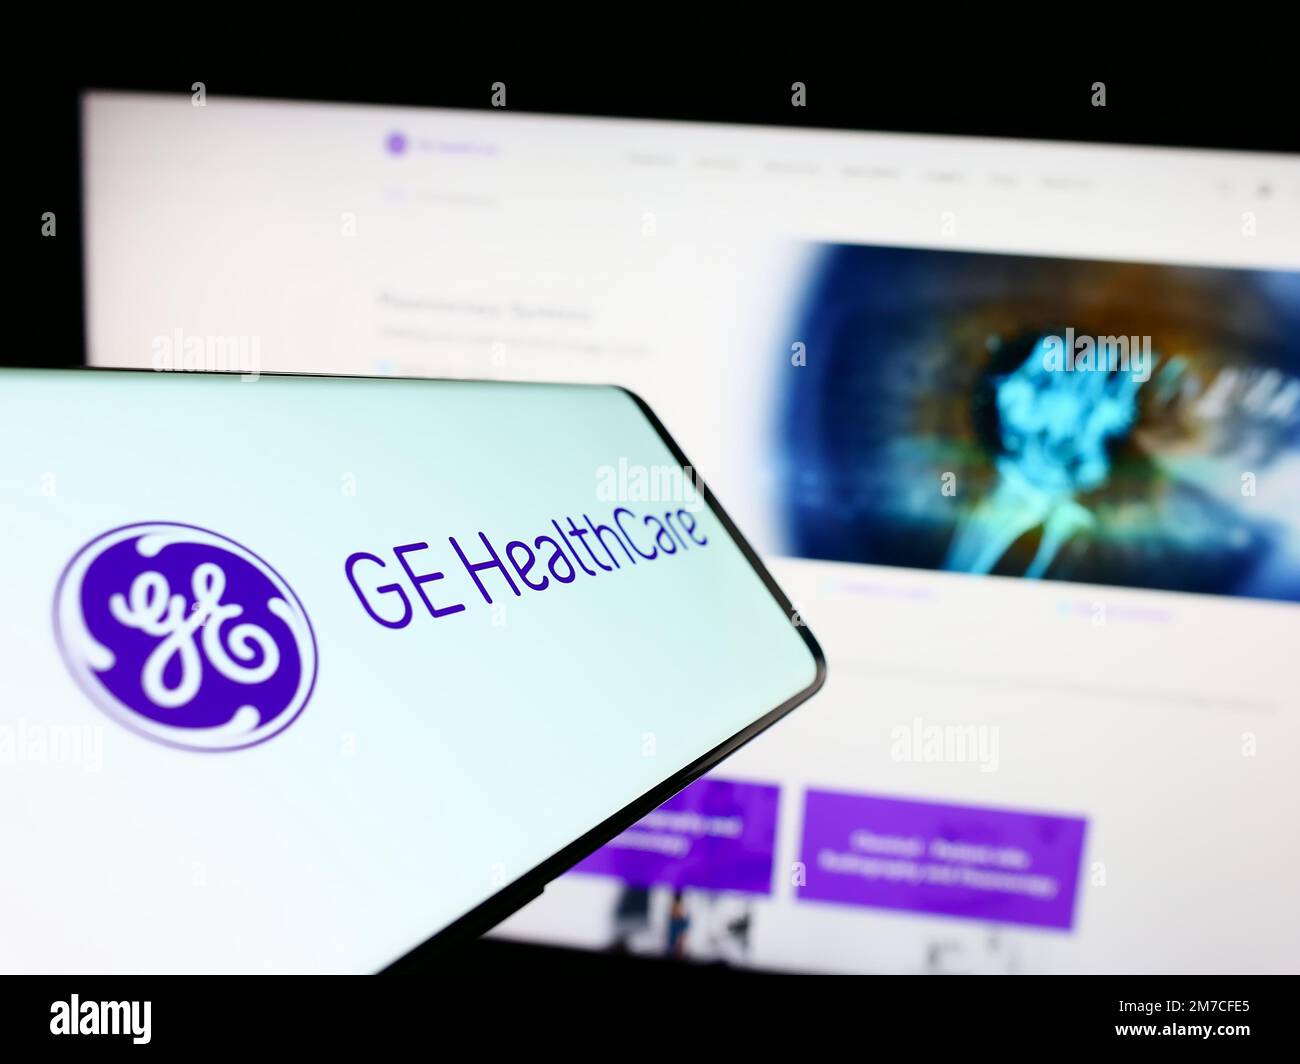 Mobile phone with logo of American company GE HealthCare Technologies Inc. on screen in front of website. Focus on center-right of phone display. Stock Photo